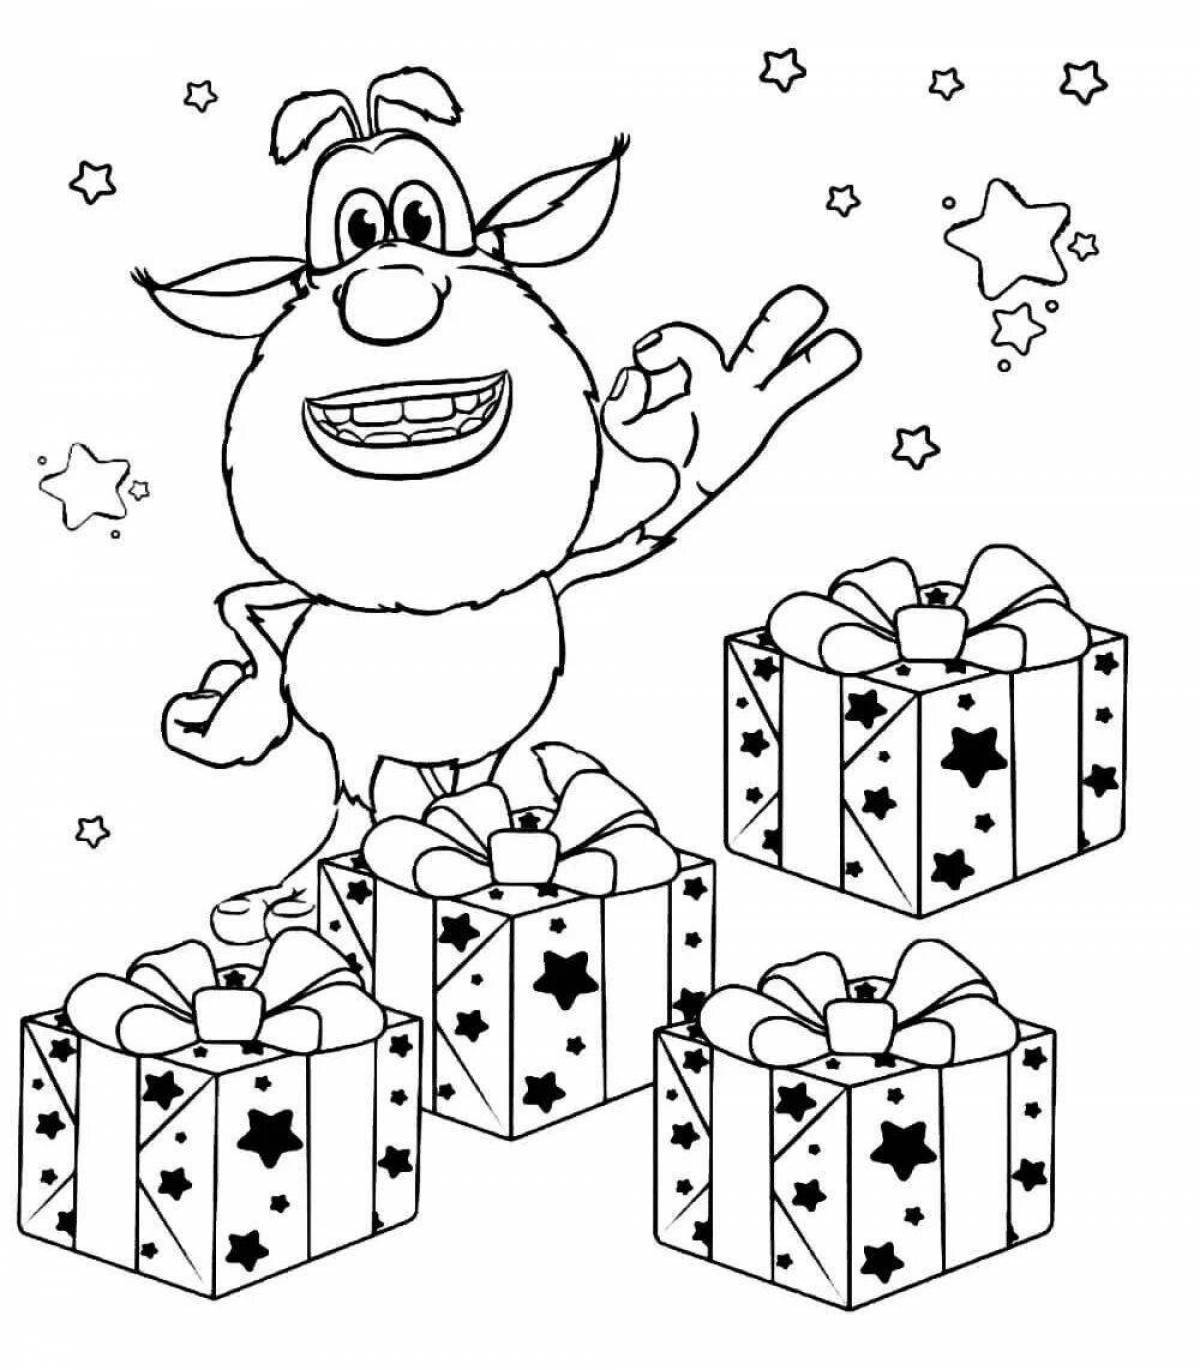 Coloring pages of joyful buba for children